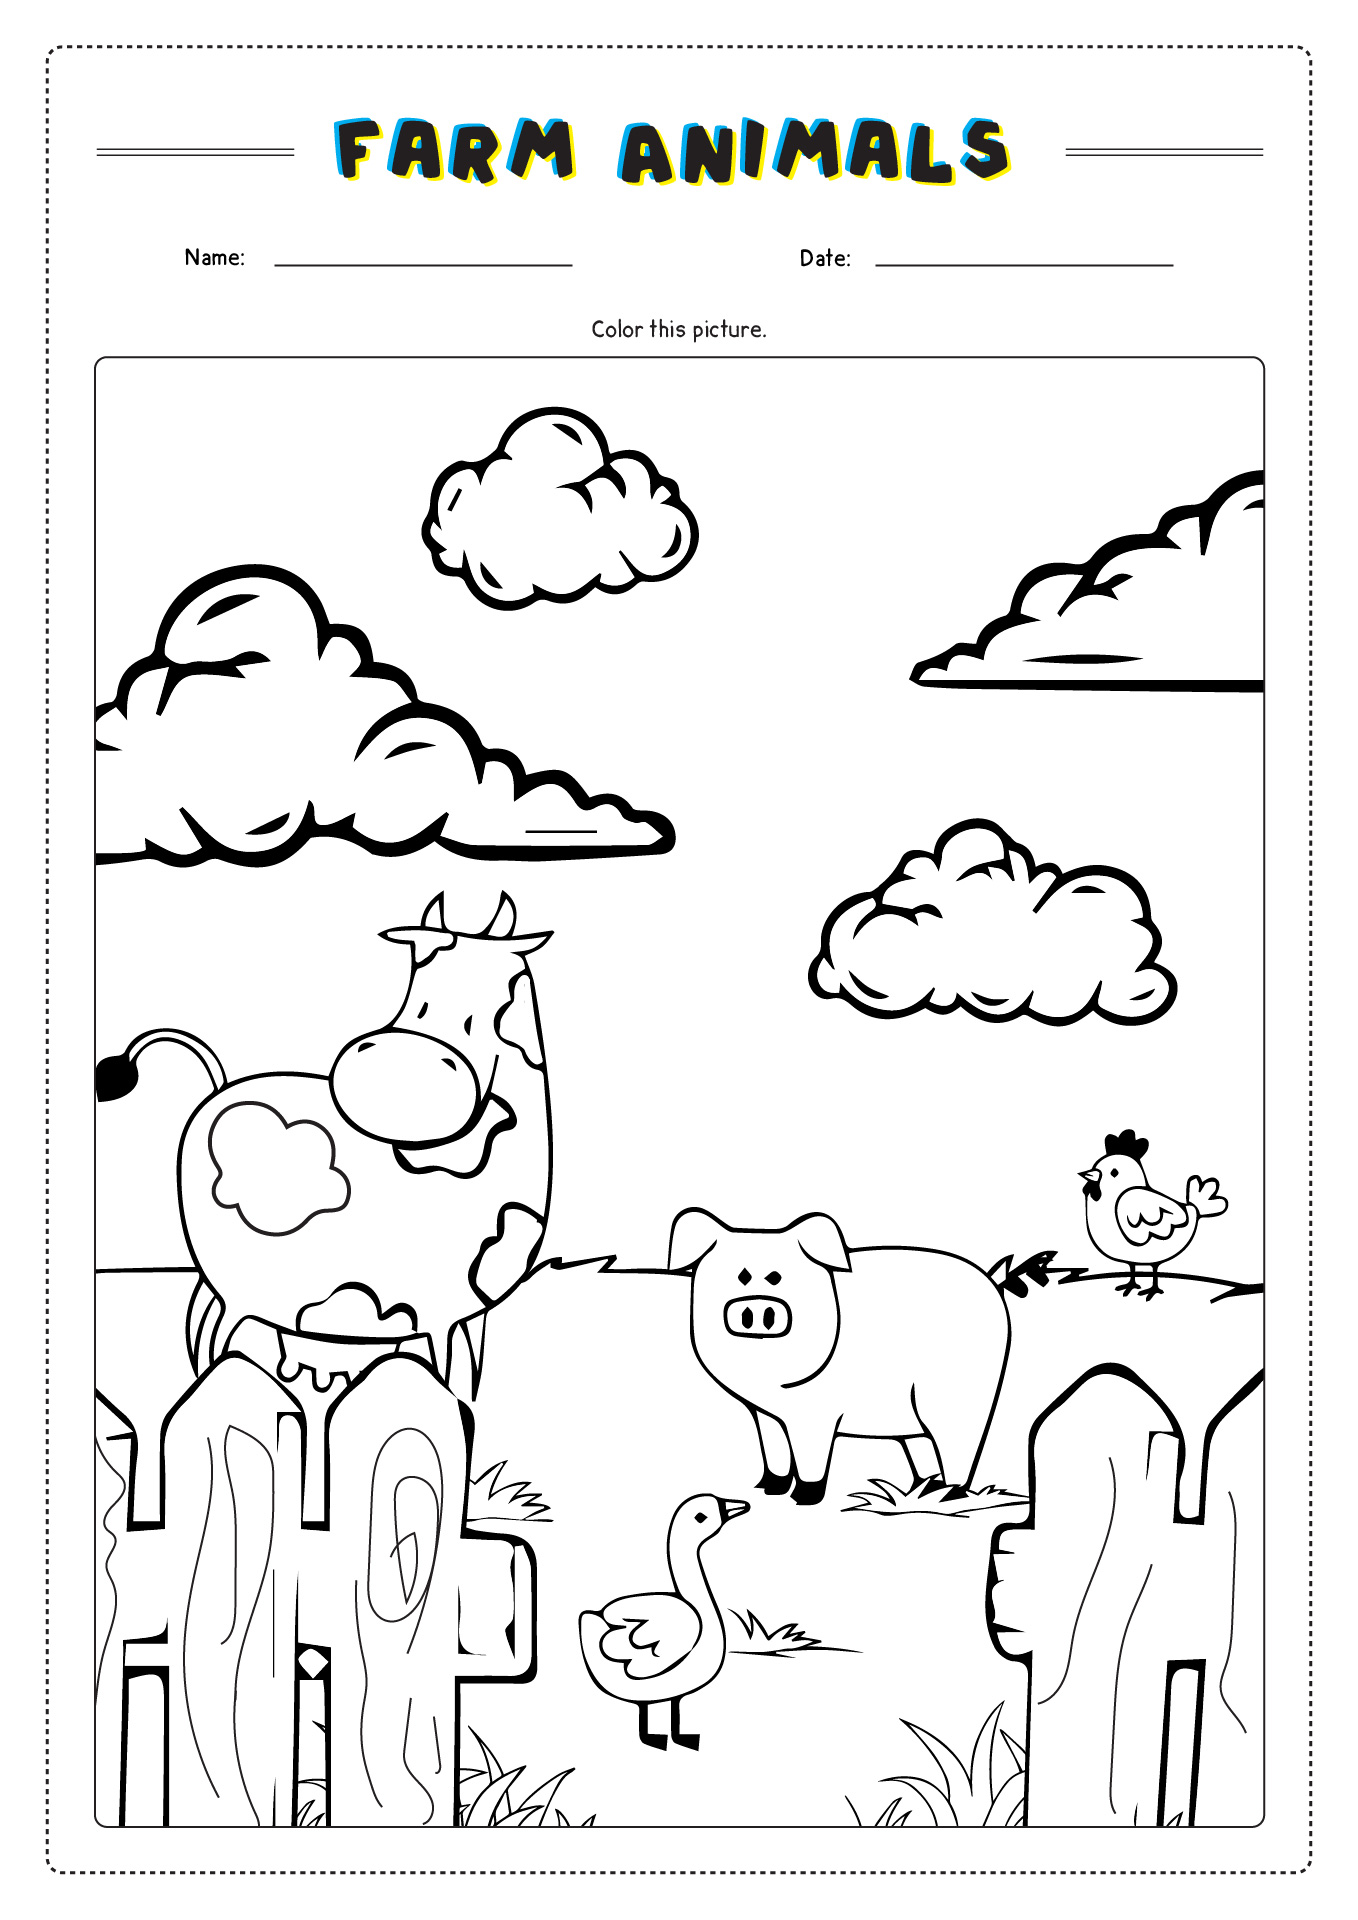 Coloring Farm Animals Worksheets For Kindergarten / Here are two great ...